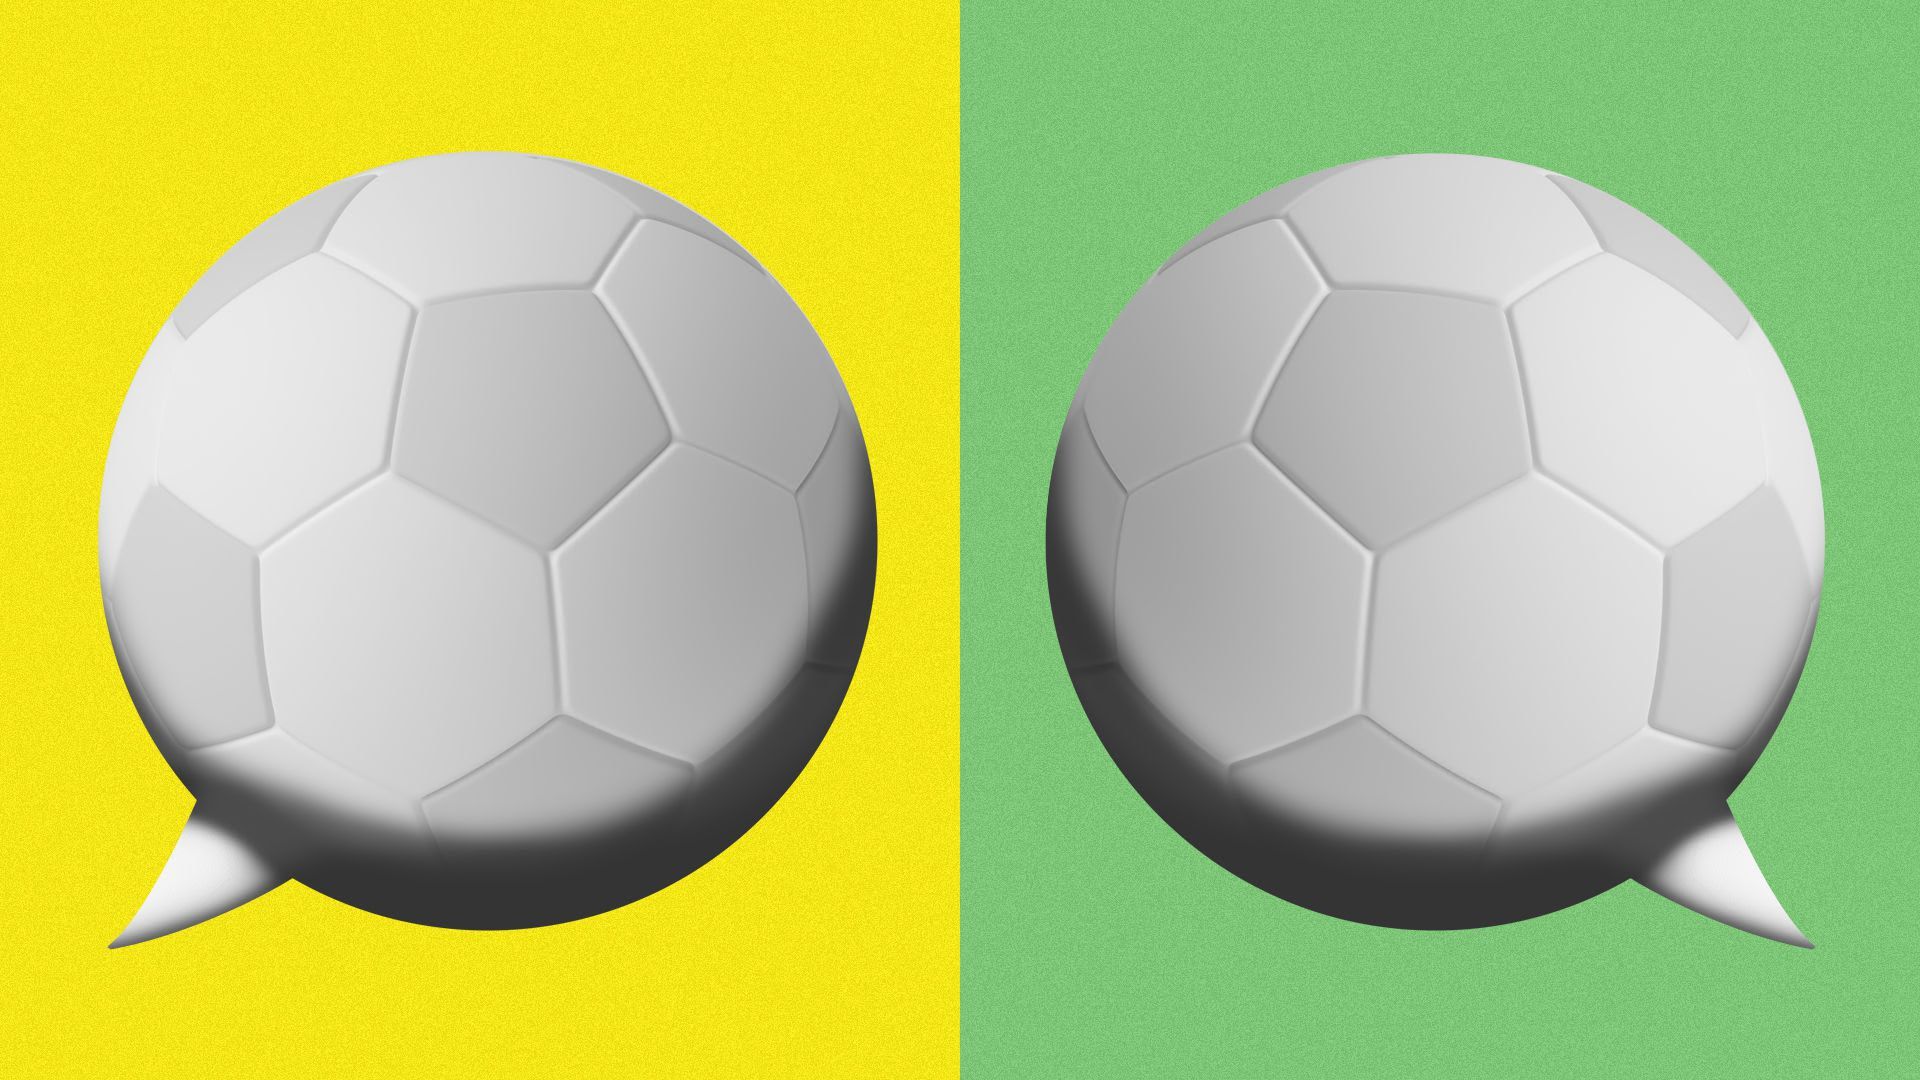 Illustration of 2 soccer balls appearing side by side as dialogue bubbles.